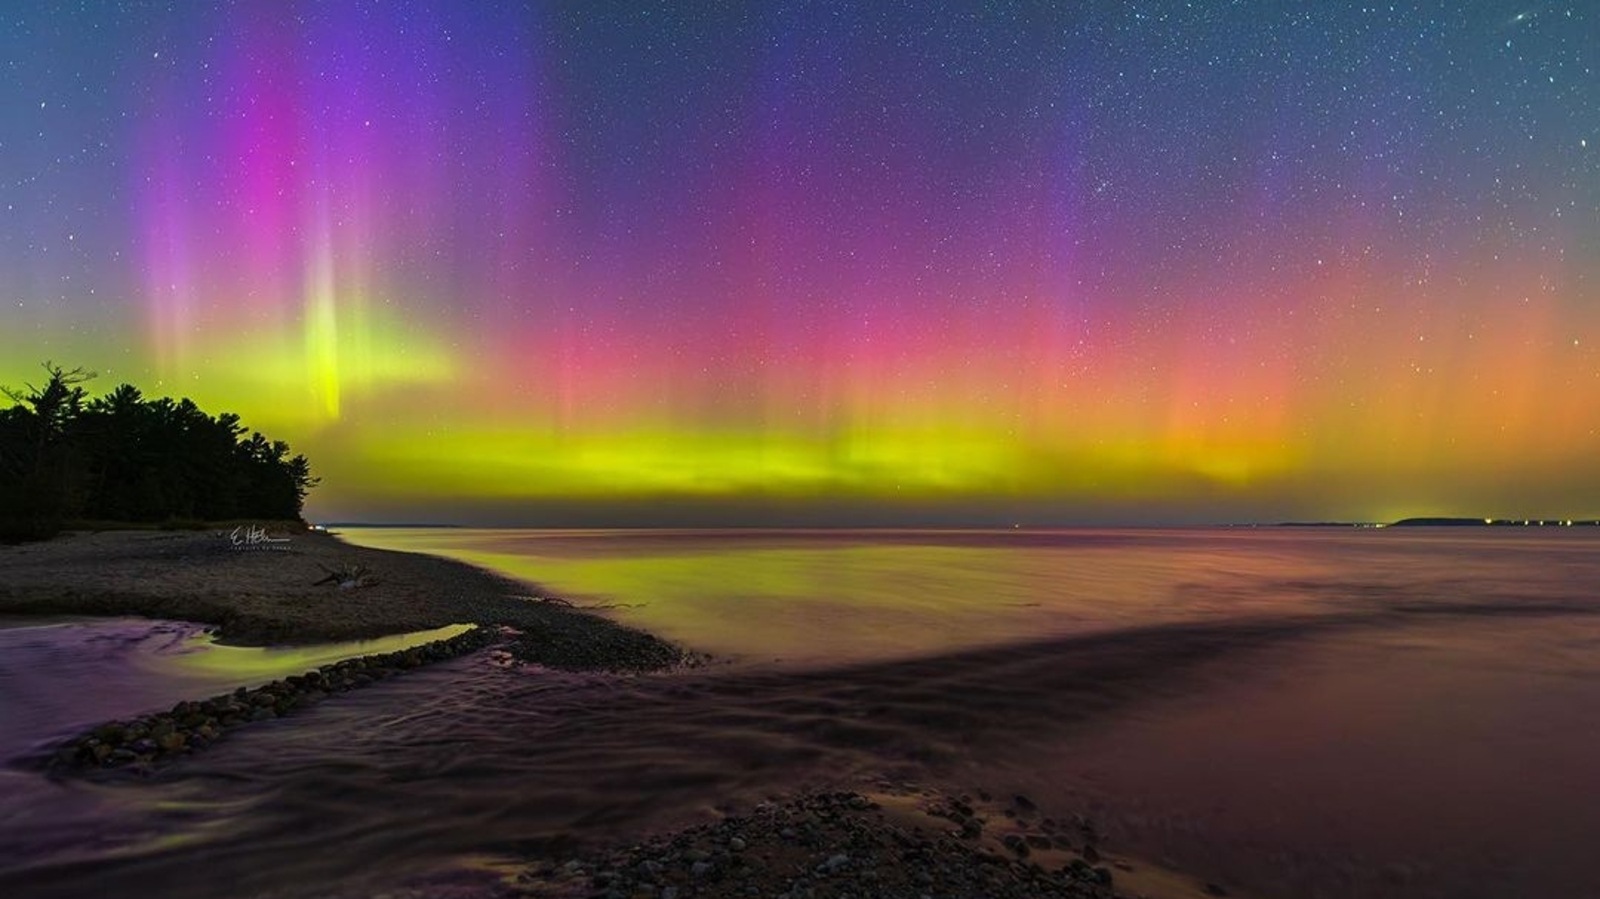 G2 geomagnetic storm hits Earth, sparks auroras in the US